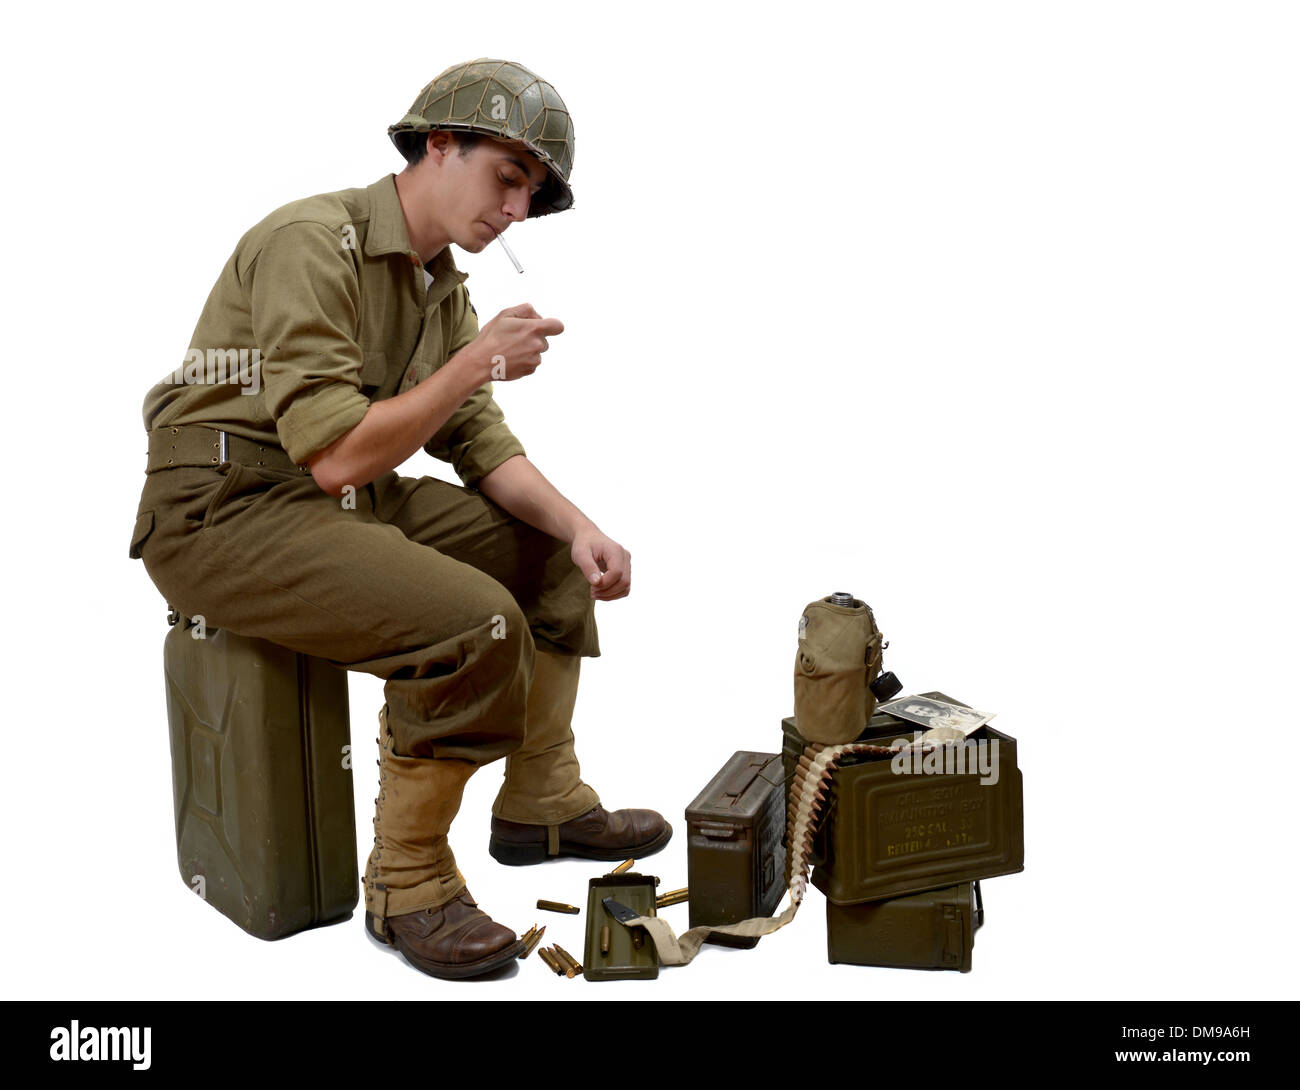 young American soldier sitting on a jerrycan lights a cigarette Stock Photo